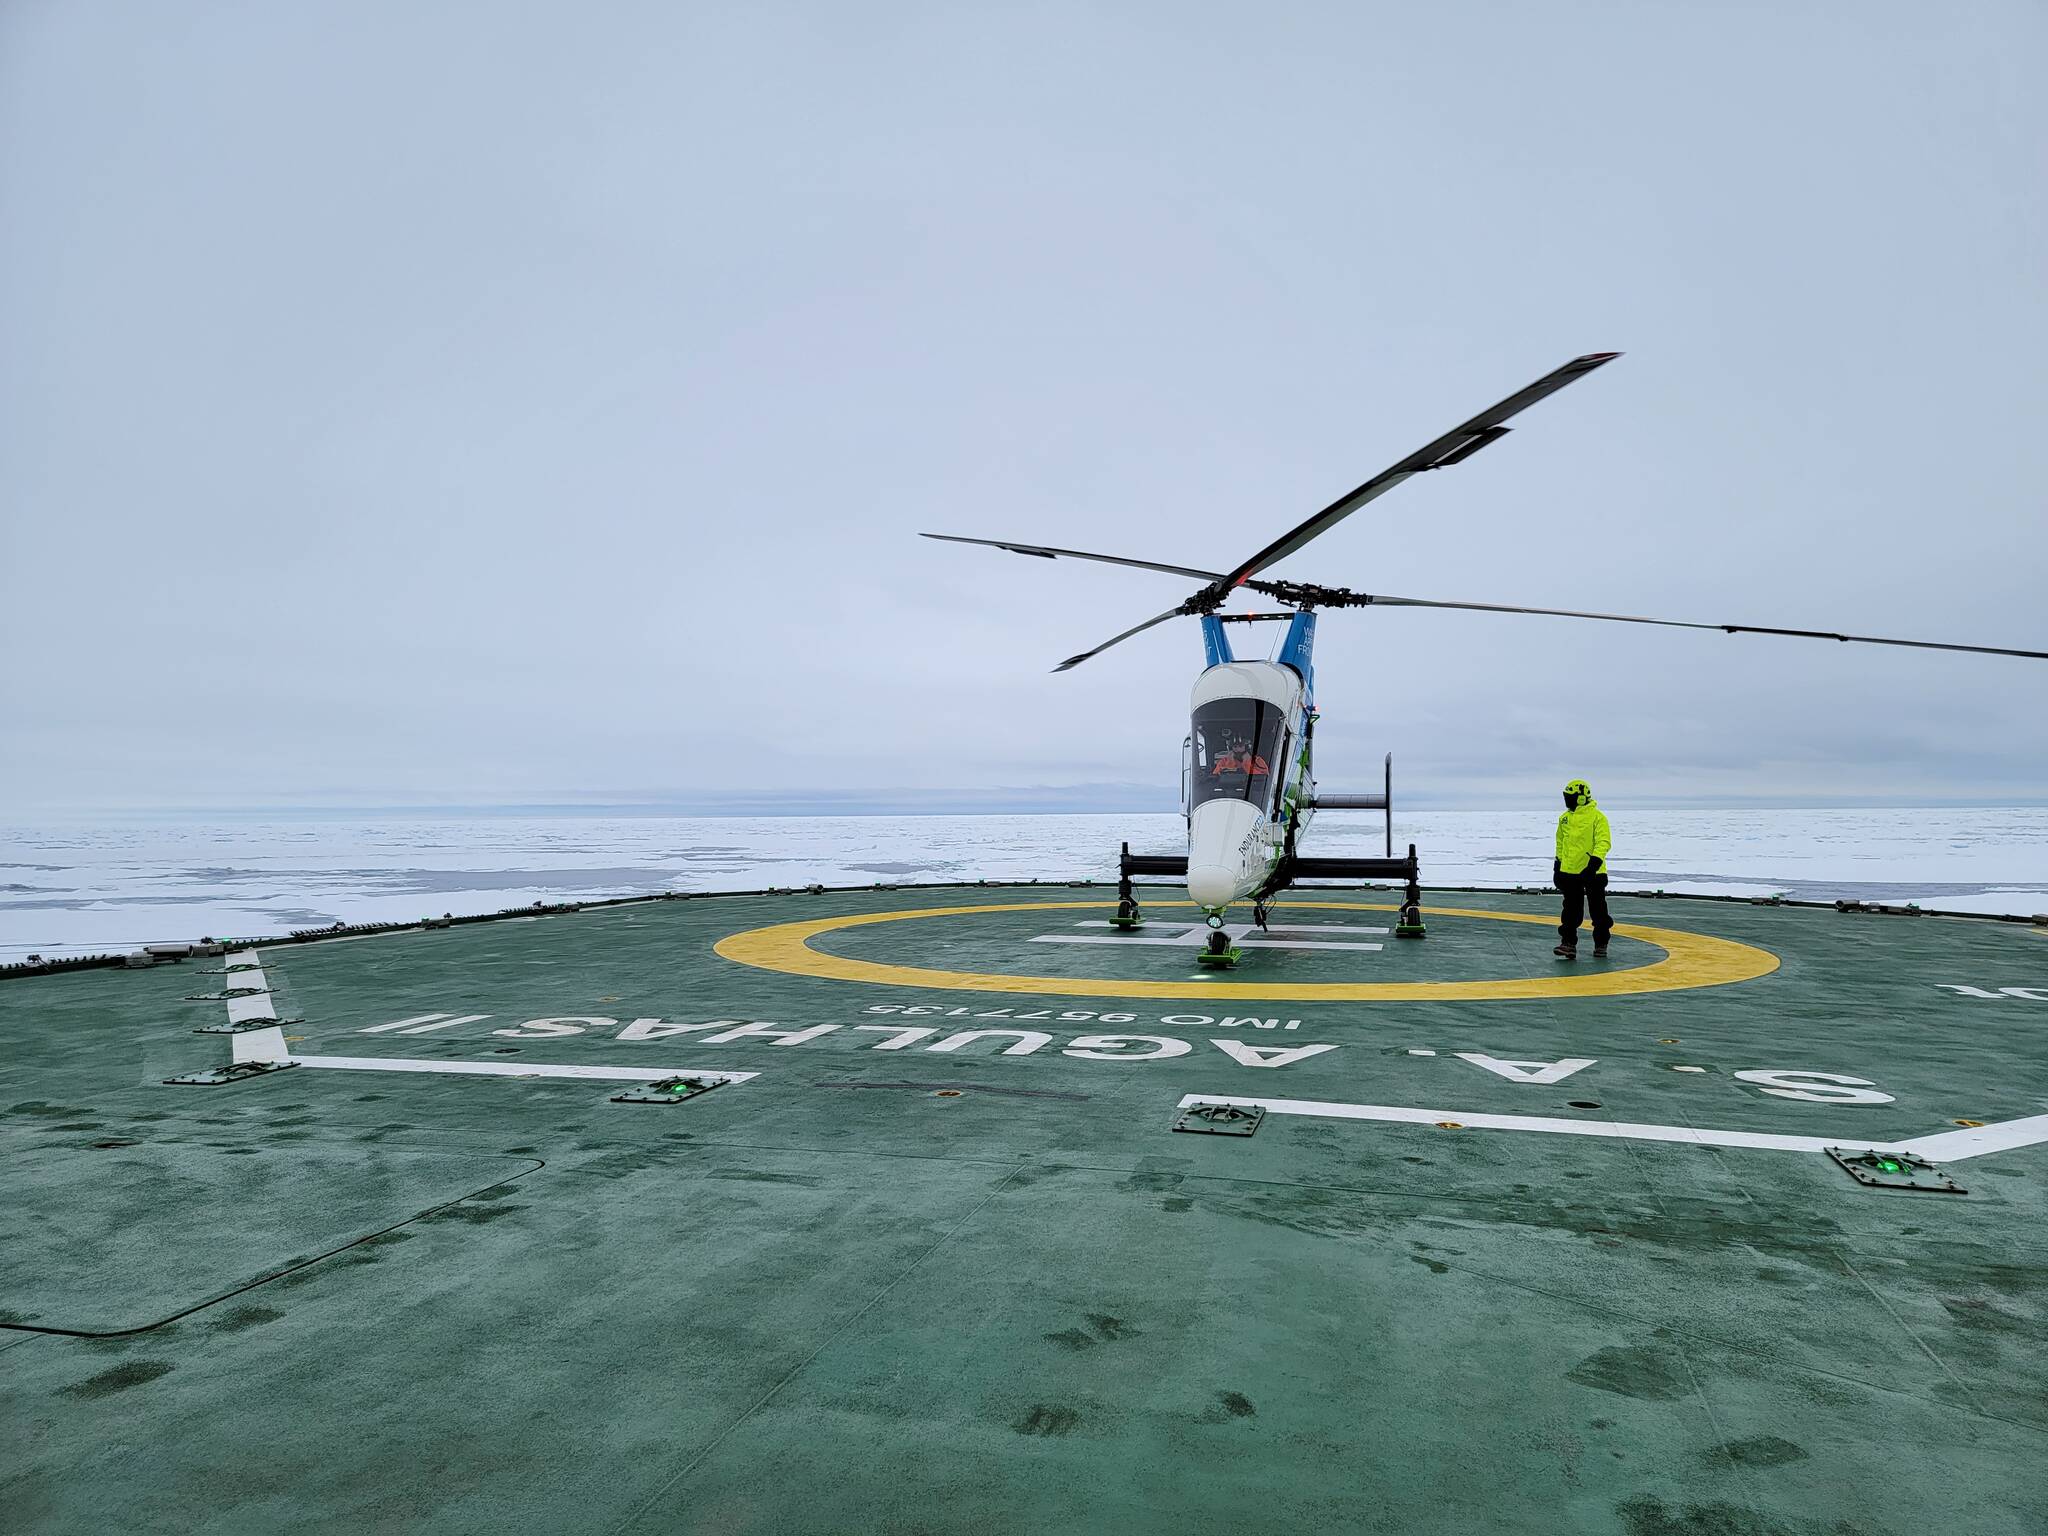 A Juneau man recently took part in the expedition to discover the location of Ernest Shackleton’s vessel, the Endurance, serving as a helicopter mechanic for the expedition’s heavy lift helicopter. (Courtesy photo / Michael Patz)